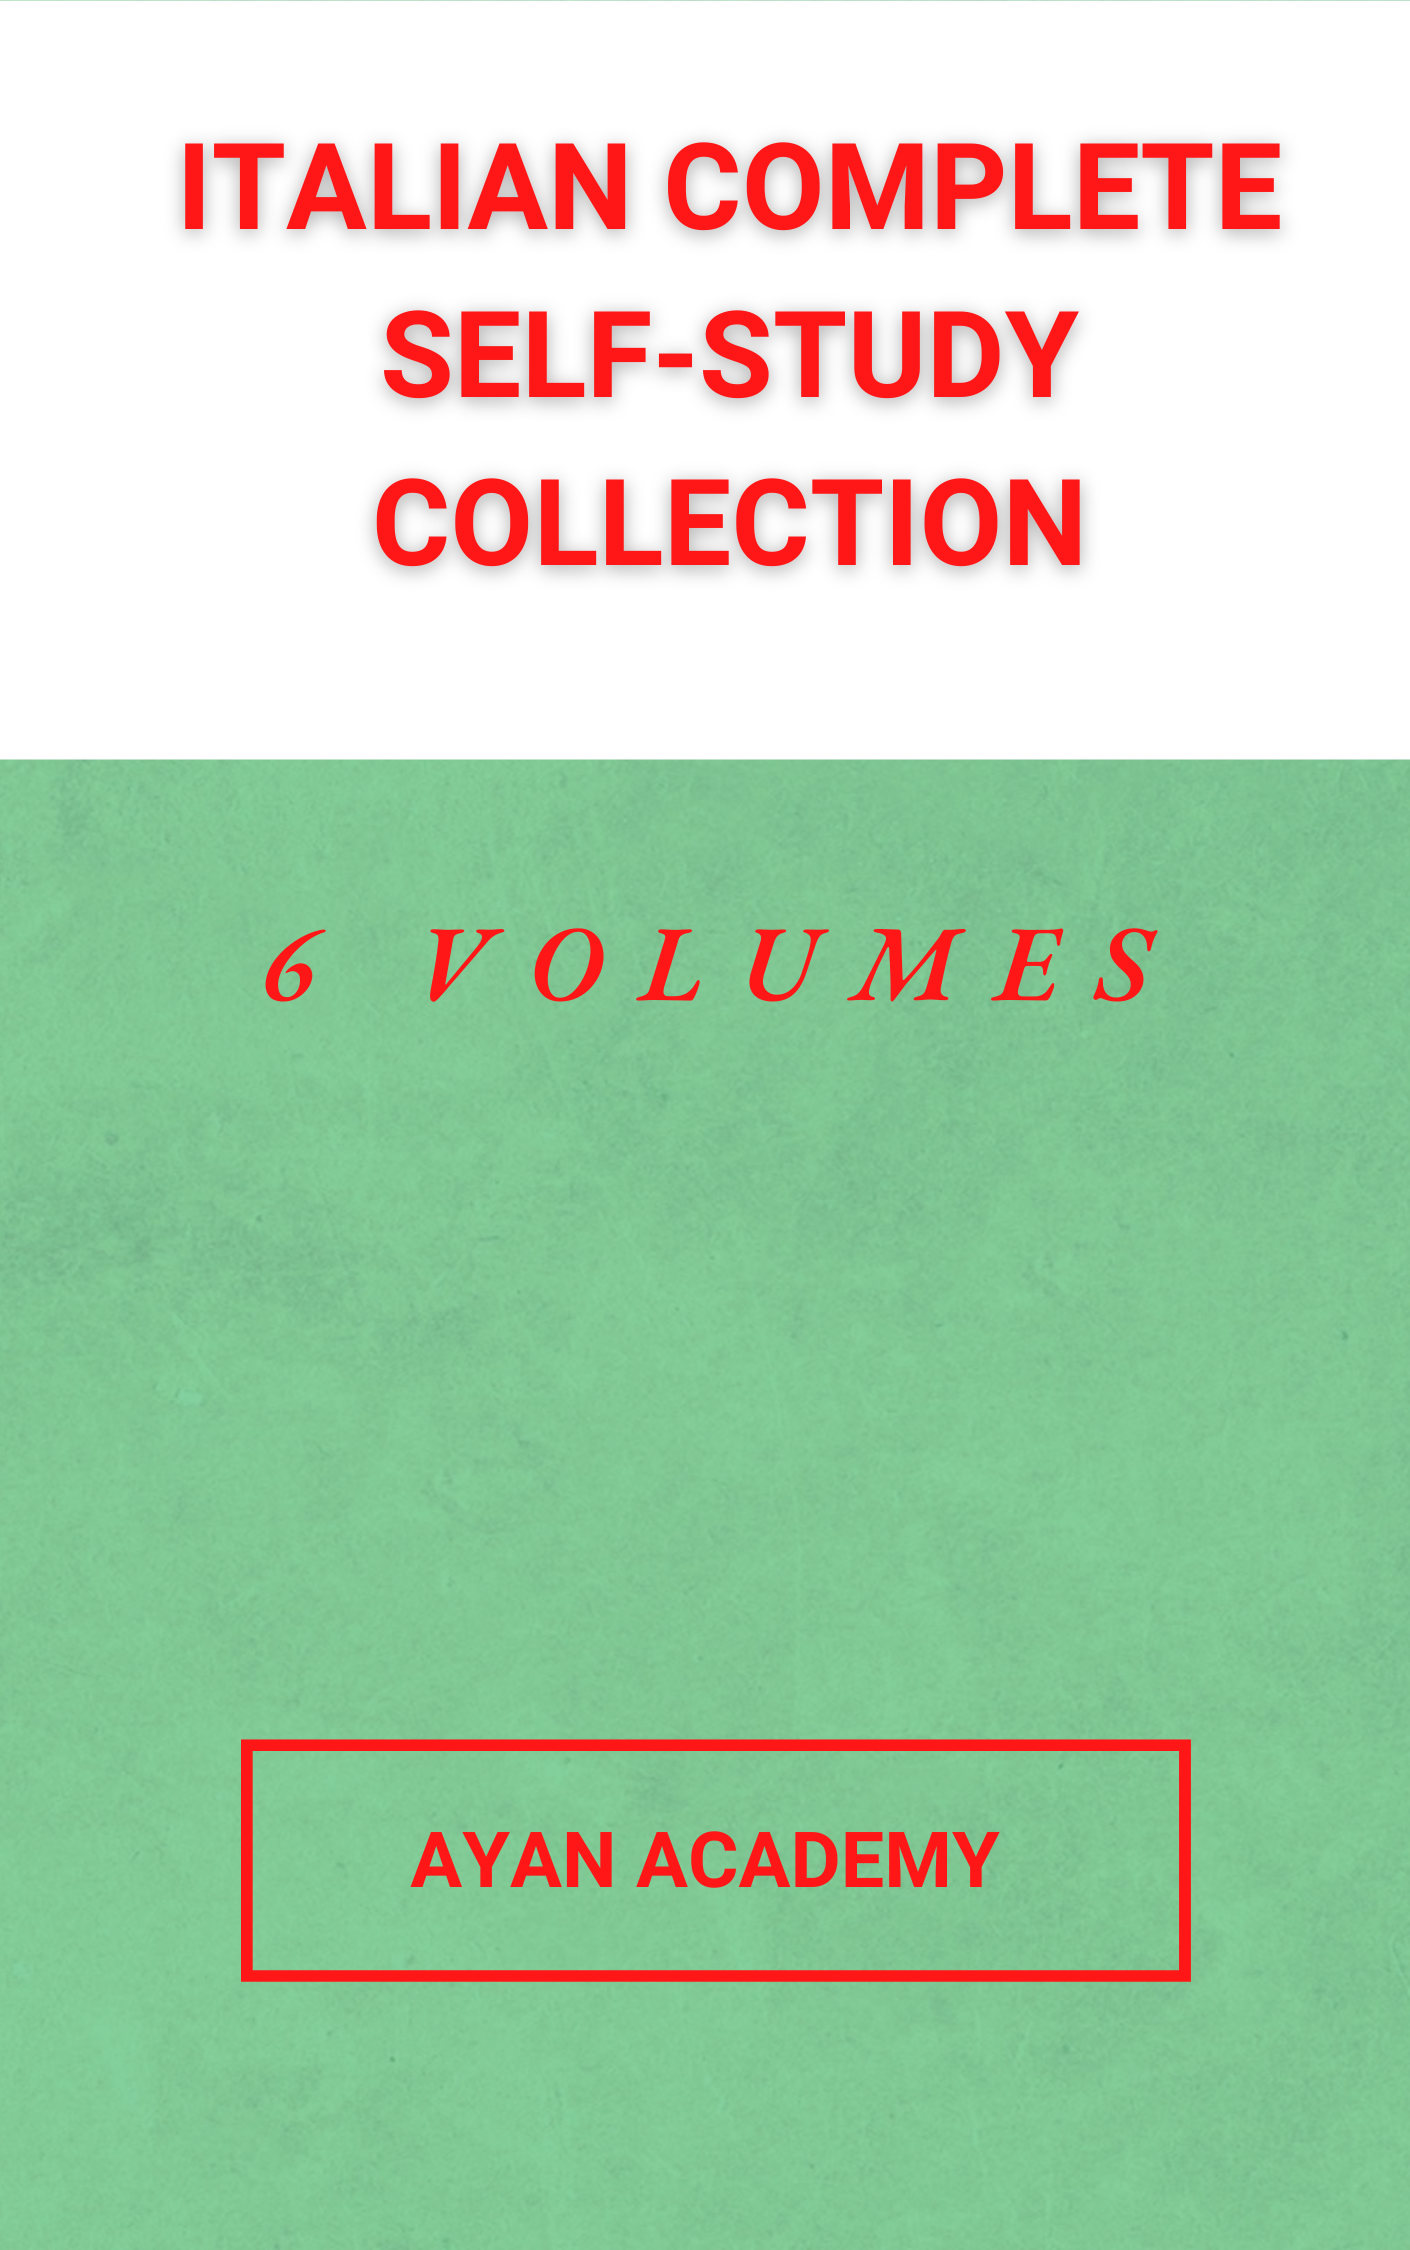 Italian Complete Self-Study Collection [6 volumes]